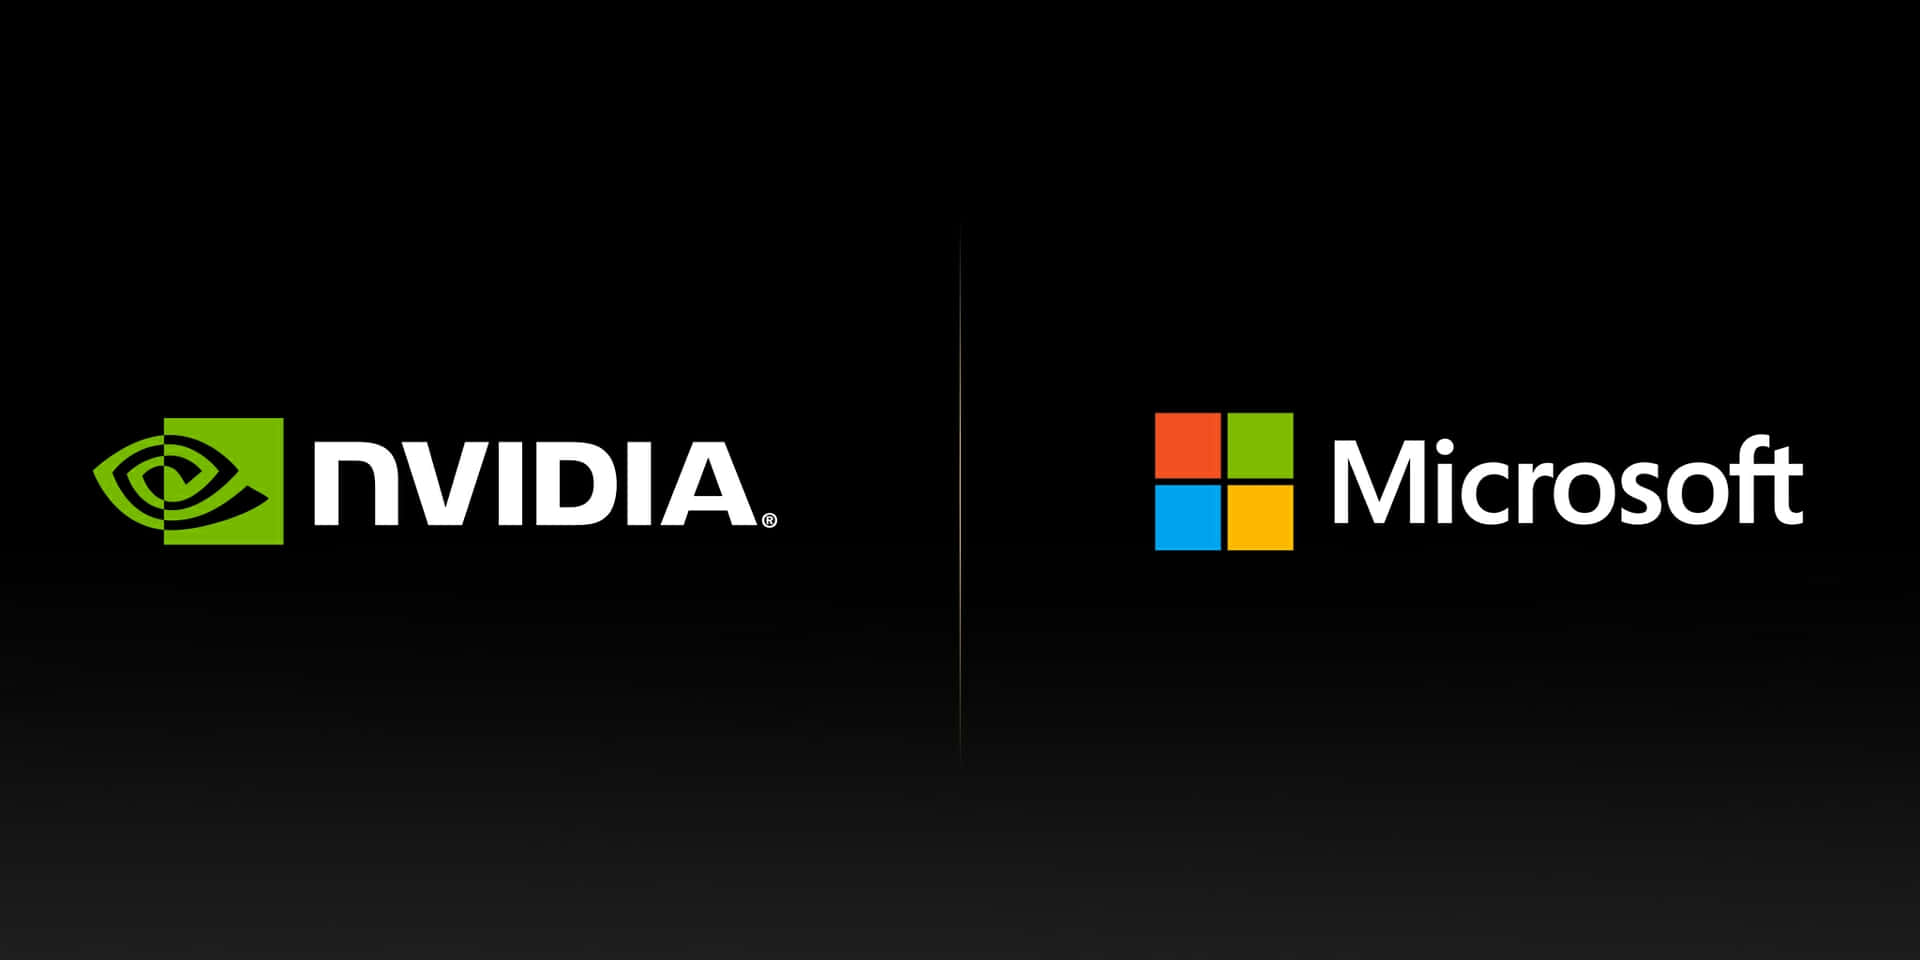 Nvidia And Microsoft Logos On A Black Background